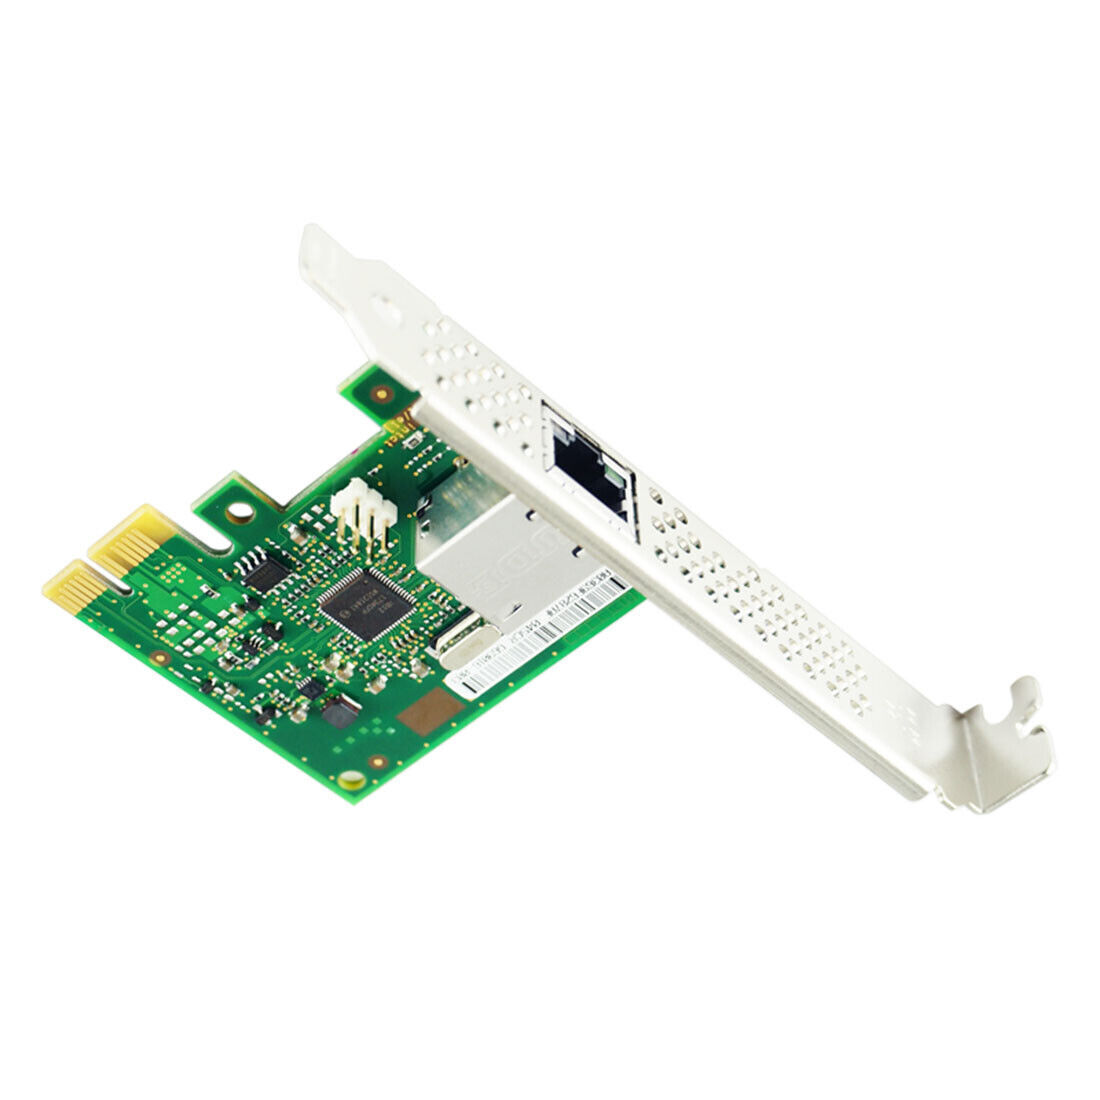 PCIe RJ45 Port Network Card Intel I210AT Chip PCI Expres x1 Ethernet LAN Adapter